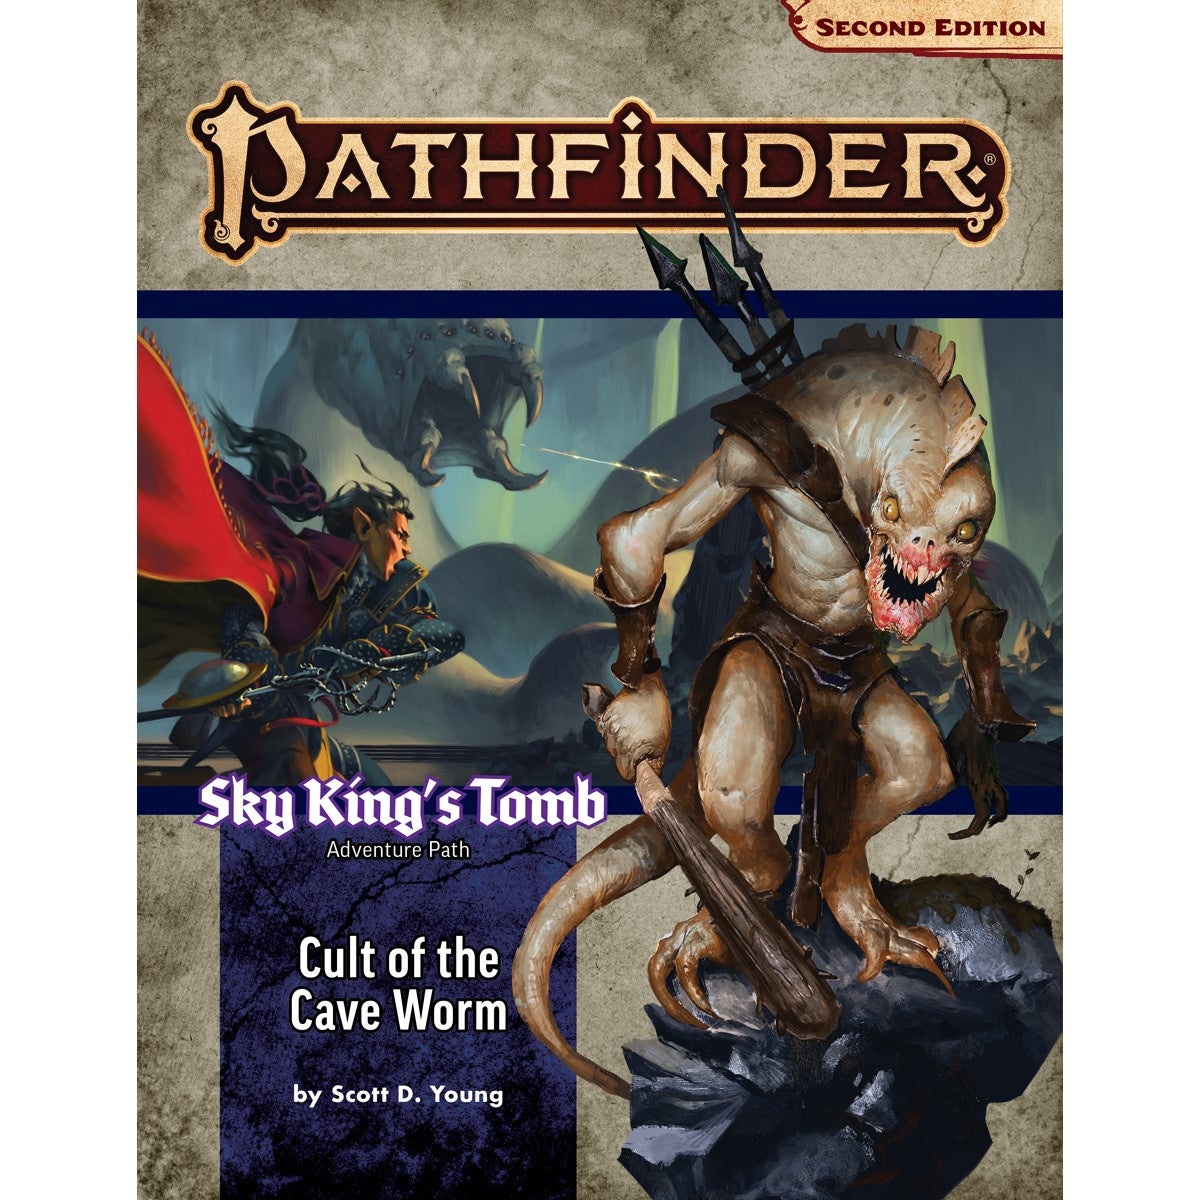 Pathfinder Second Edition Adventure Path: Sky Kings Tomb #2 Cult of the Cave Worm